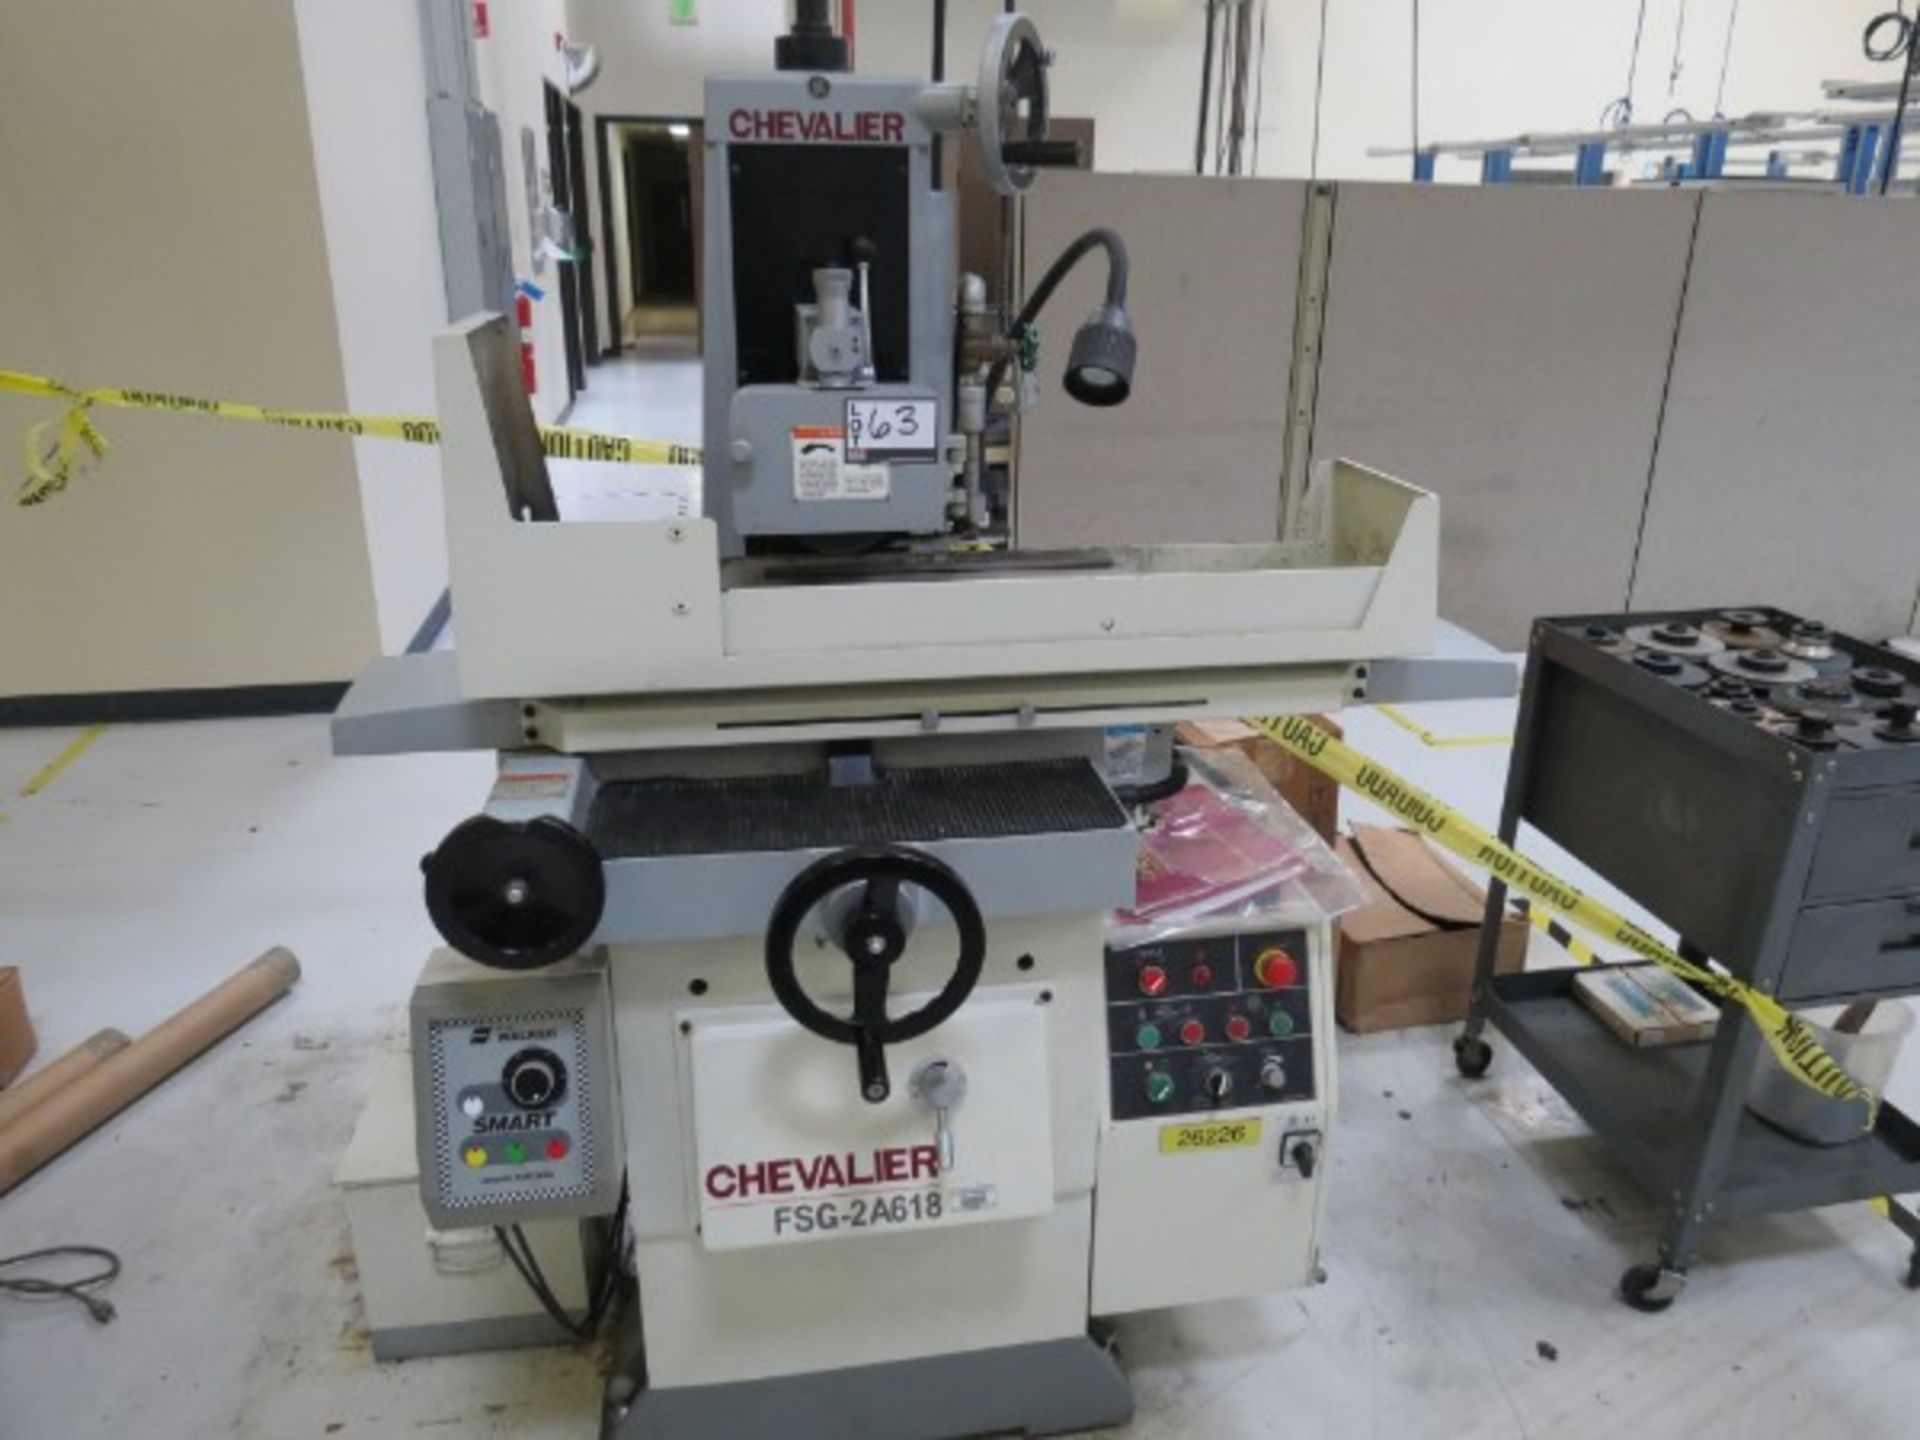 Chevalier FSG-2A618 2 Axis Hyd Surface grinder, 6”x18”, Electro-Magnetic chuck, S/N R7961001